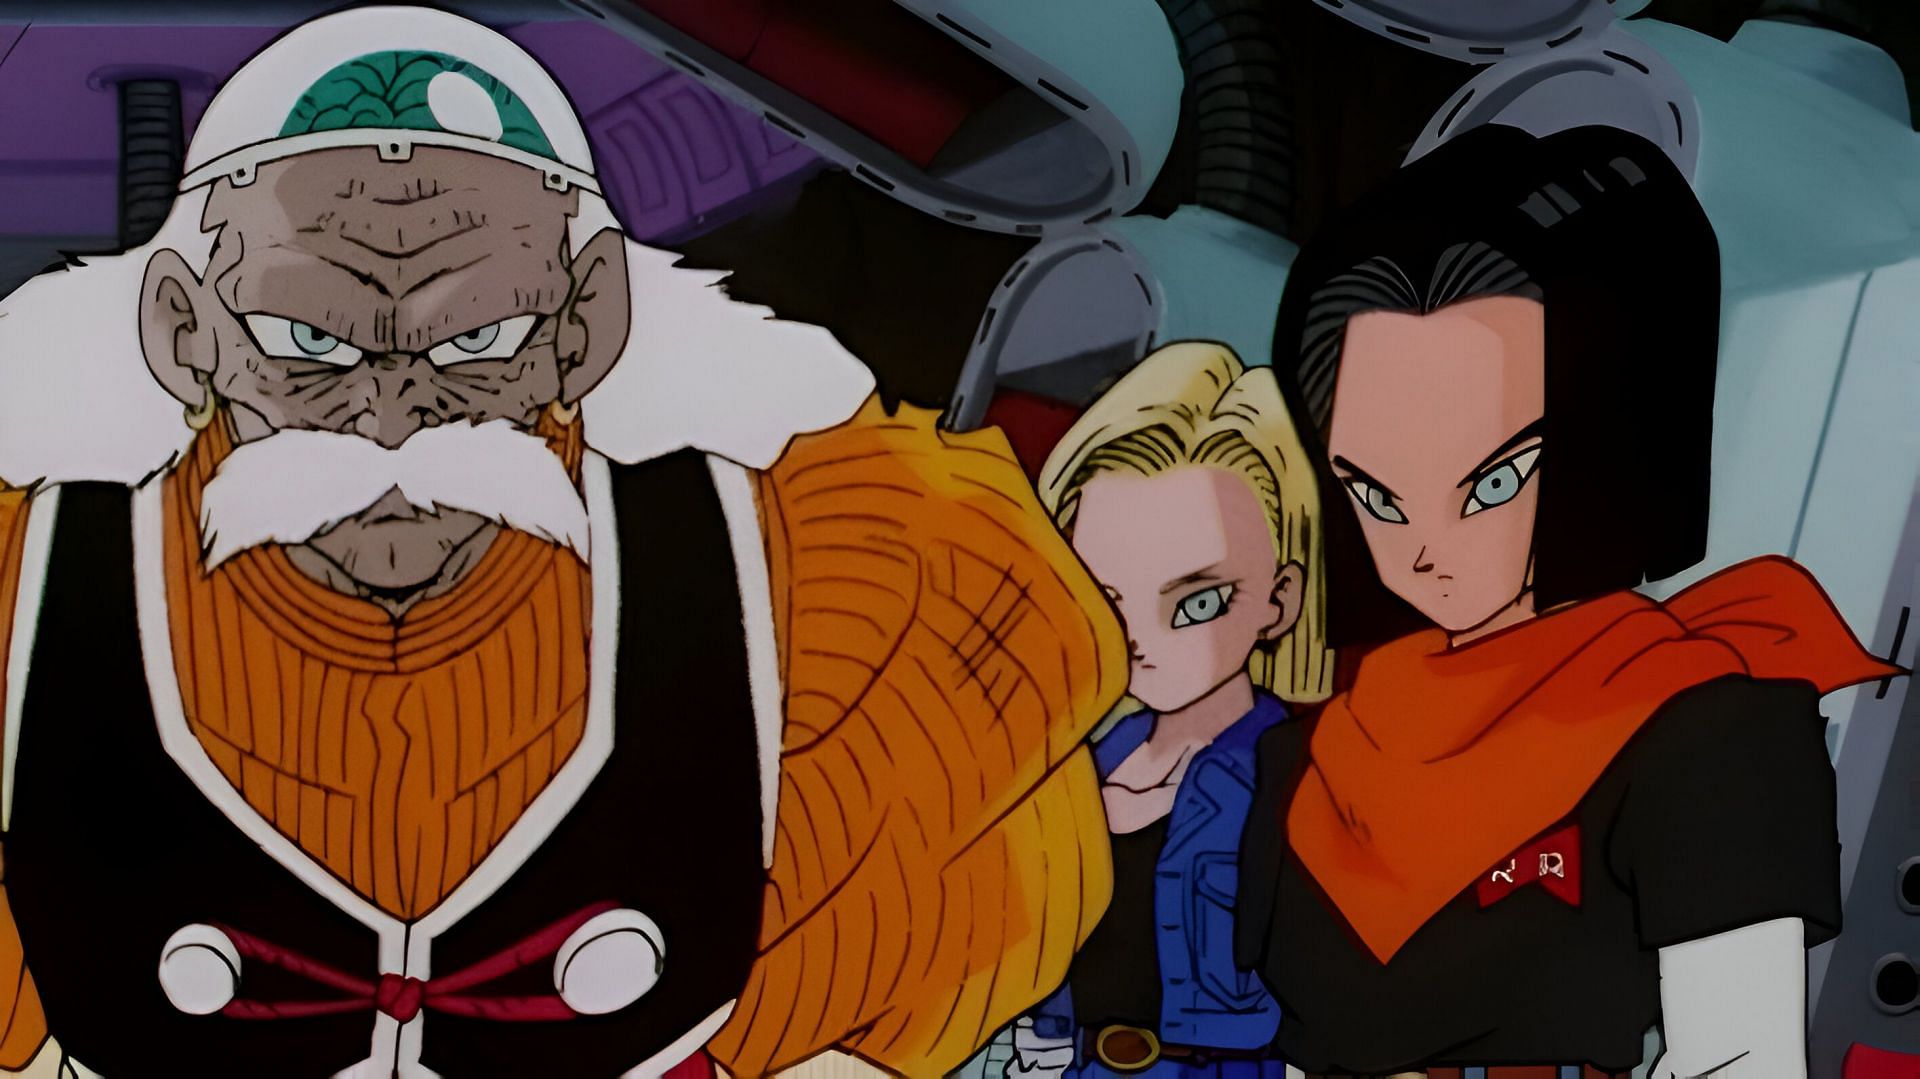 Androids standing alongside Dr. Gero (Image via Toei Animation)